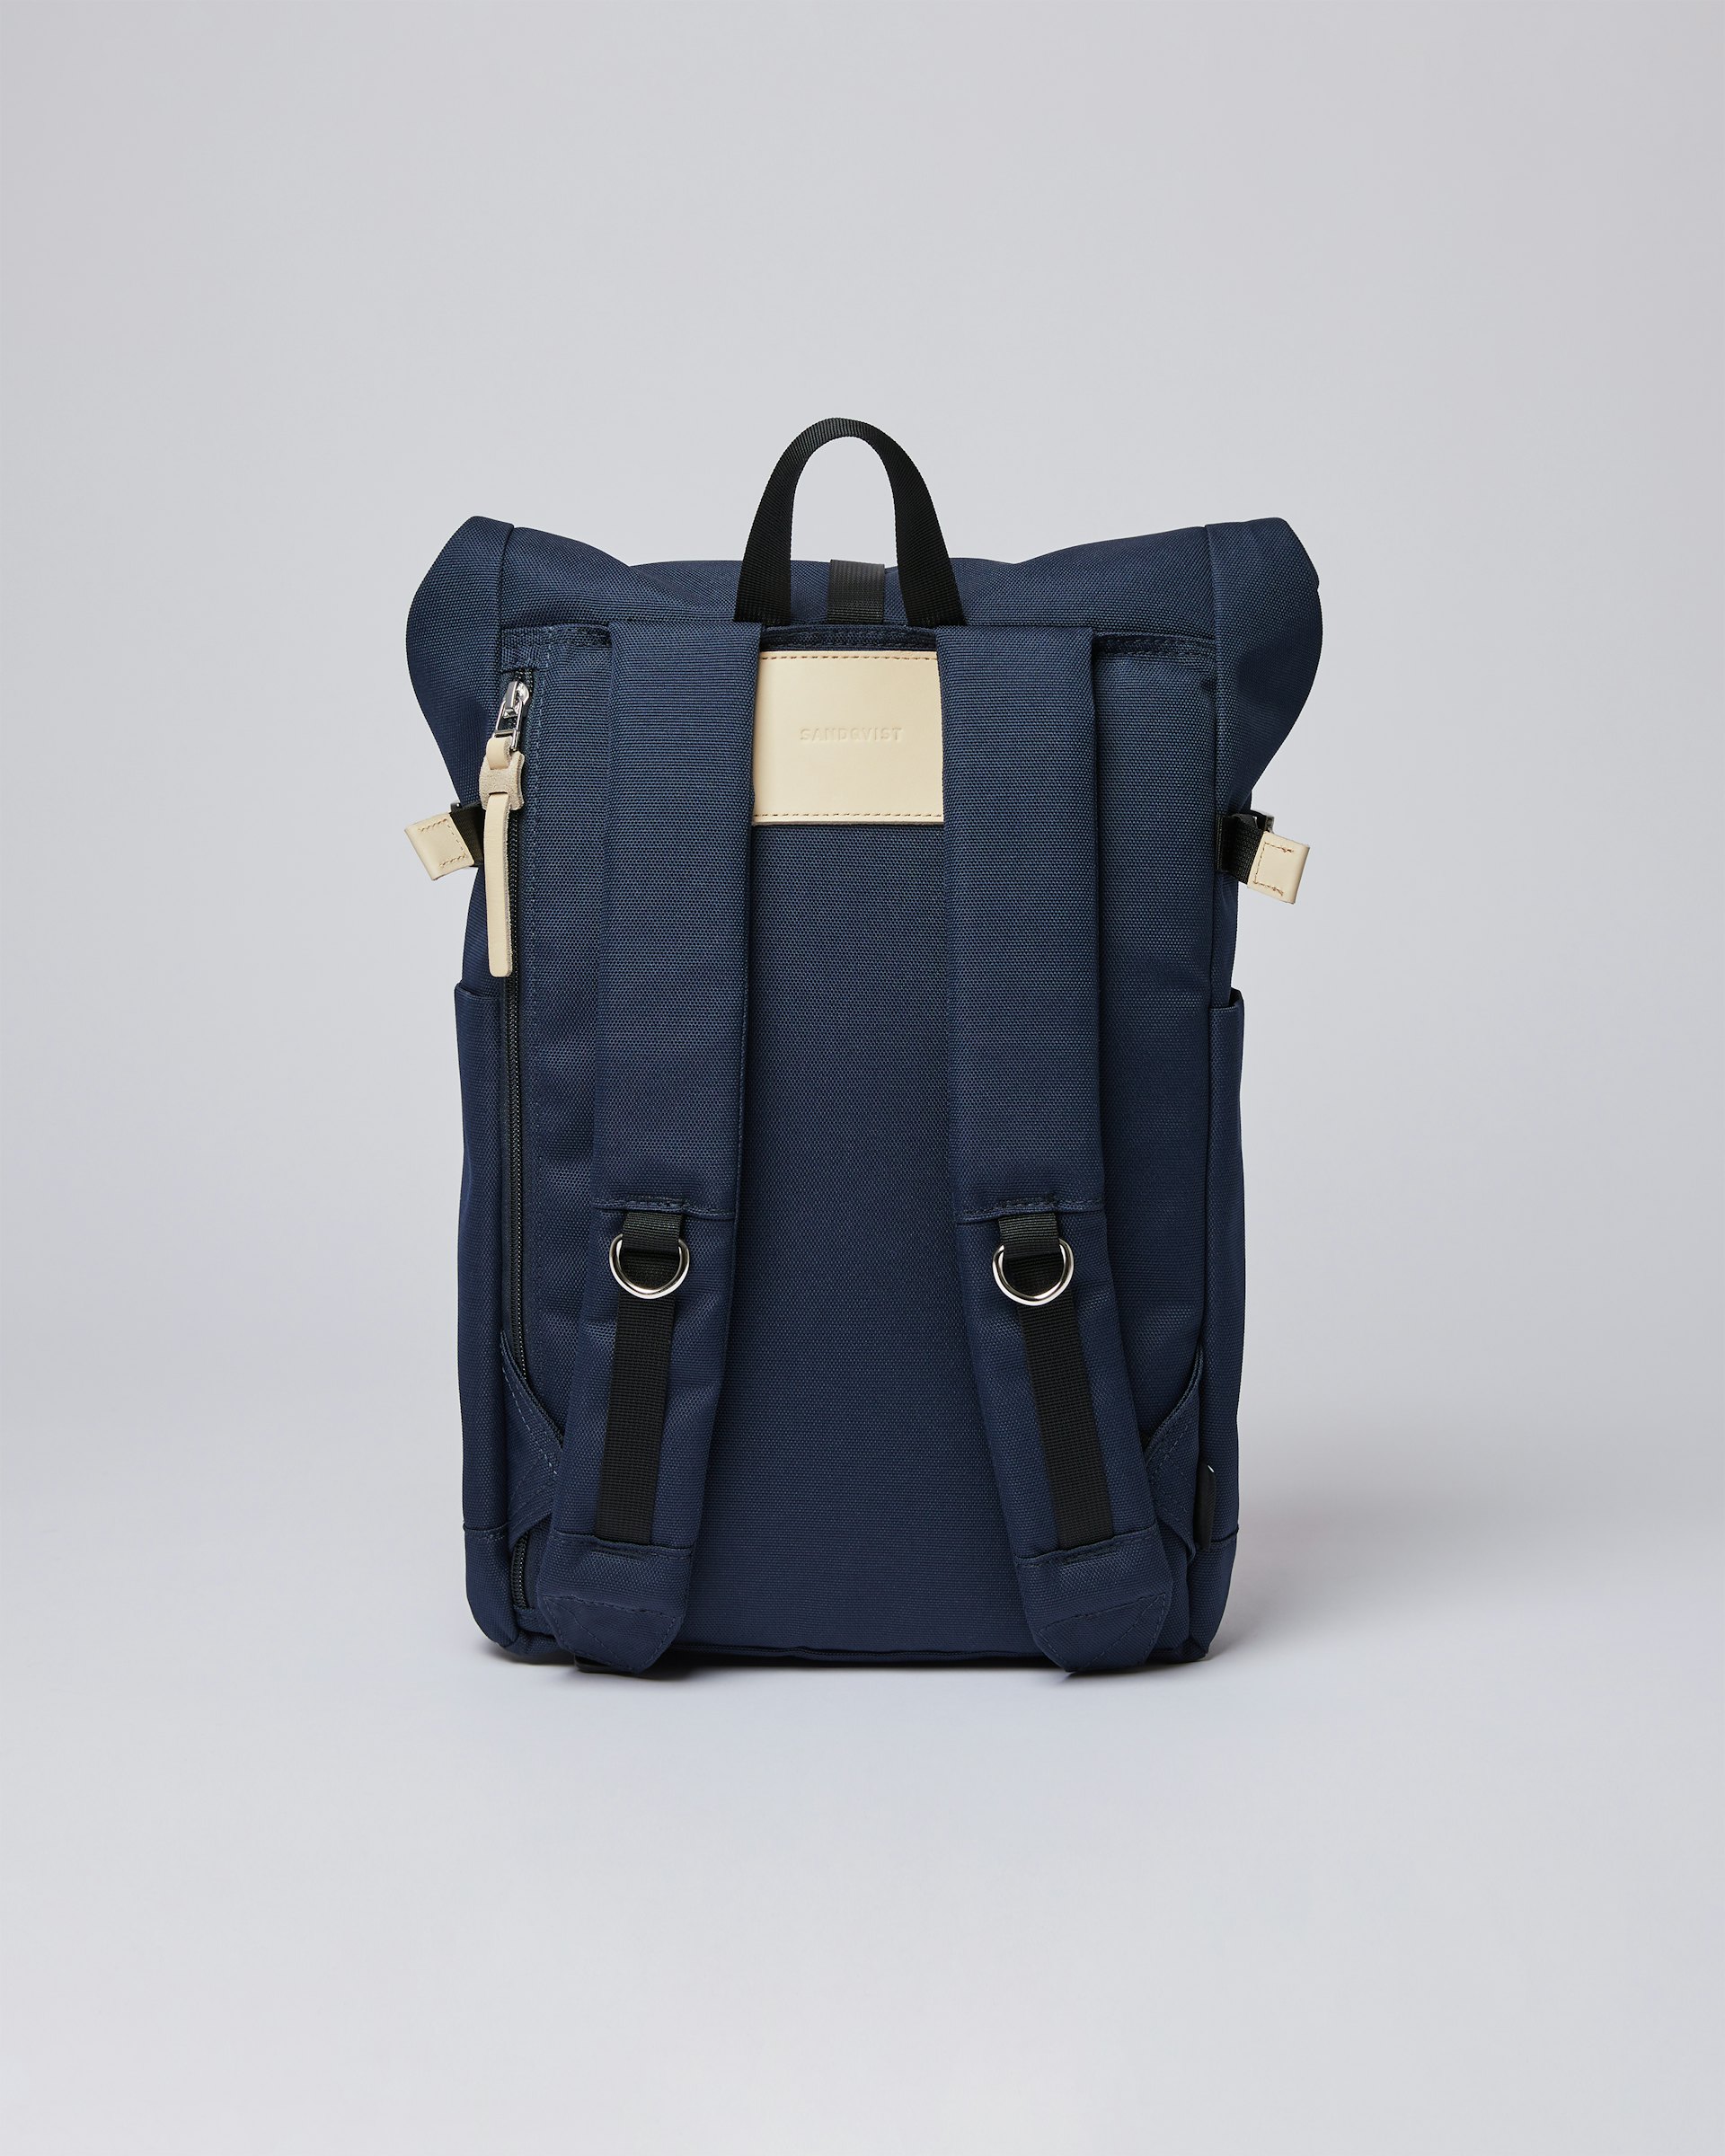 Ilon belongs to the category Backpacks and is in color navy (4 of 7)